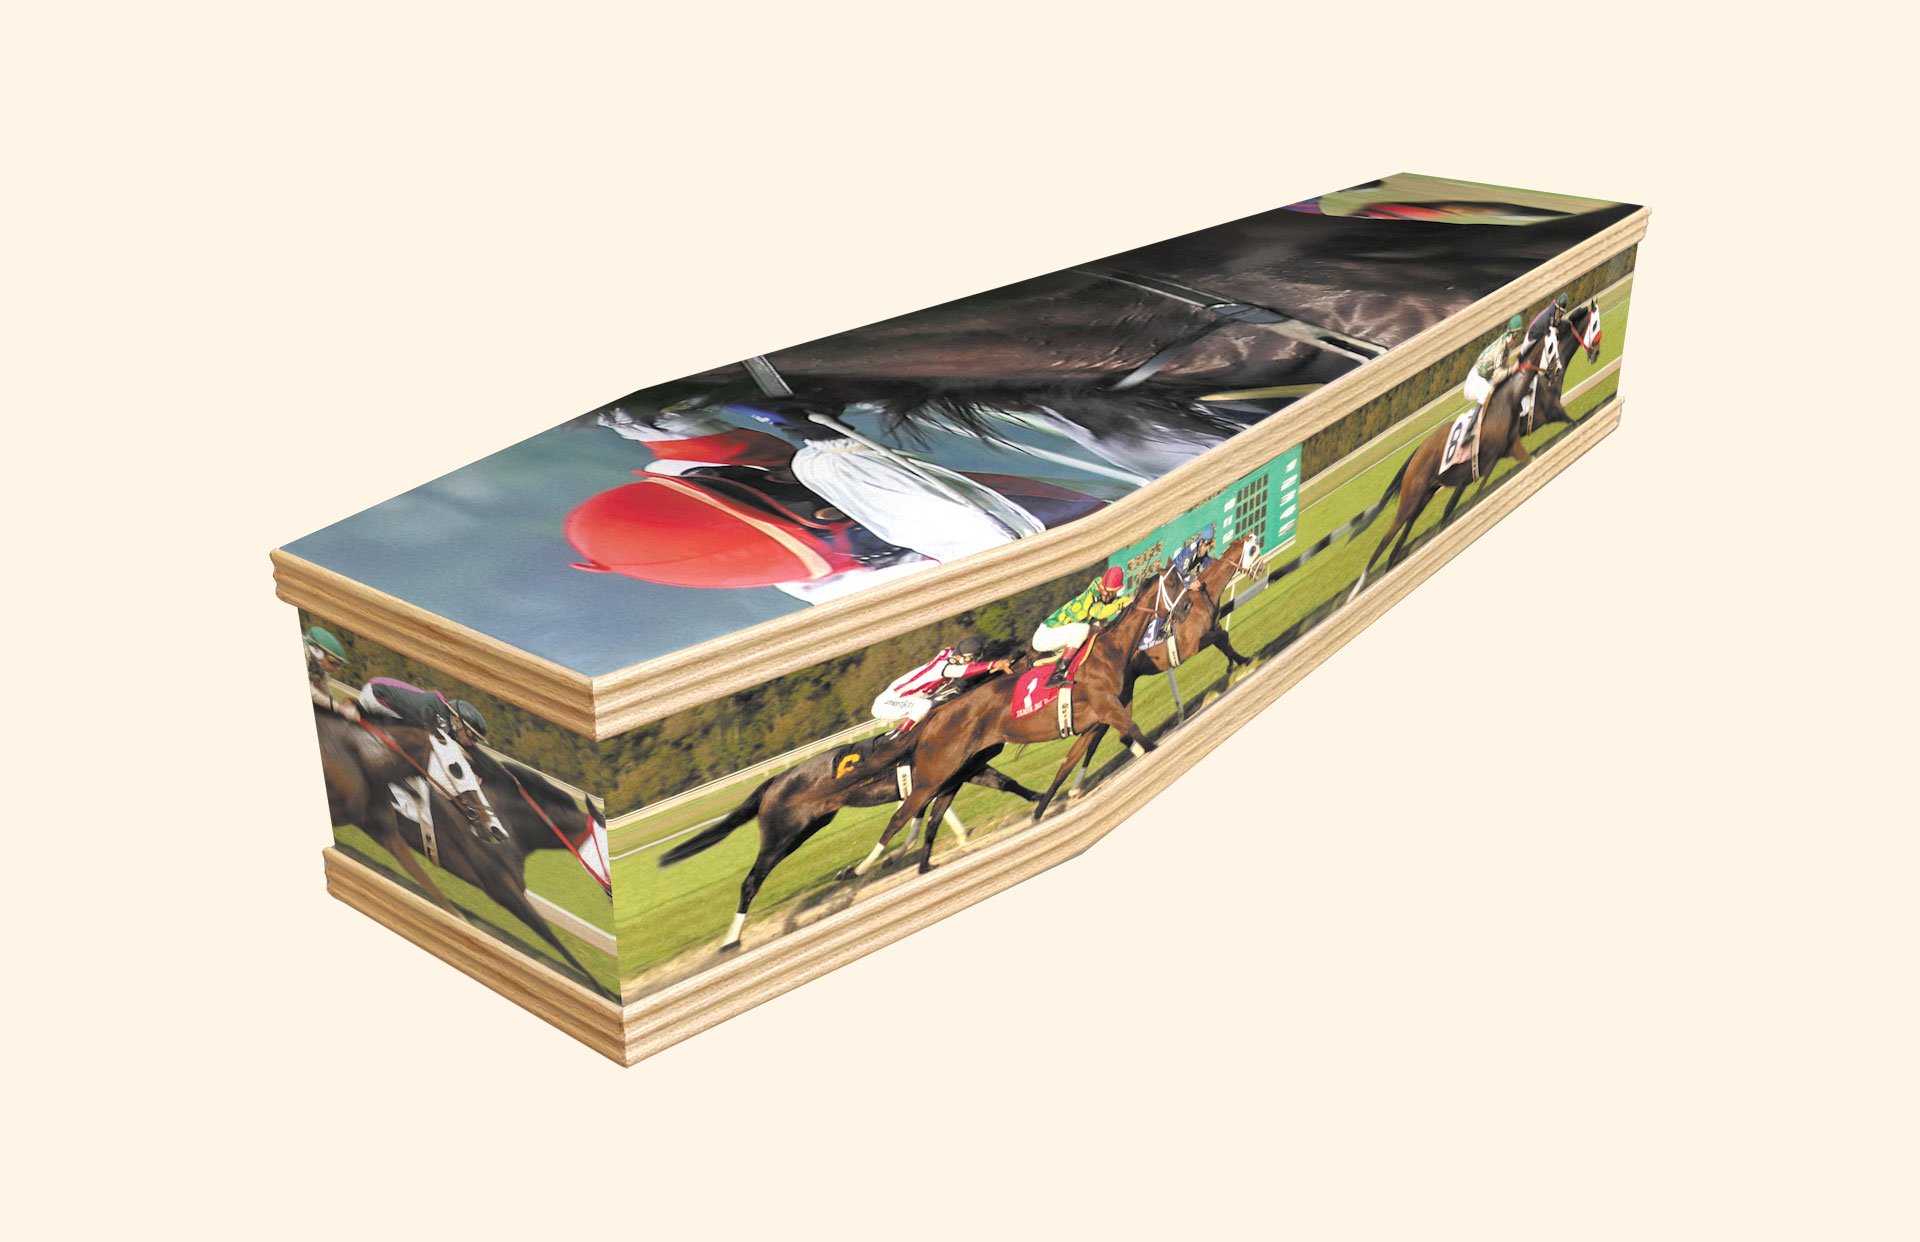 Horse Racing design on a classic coffin